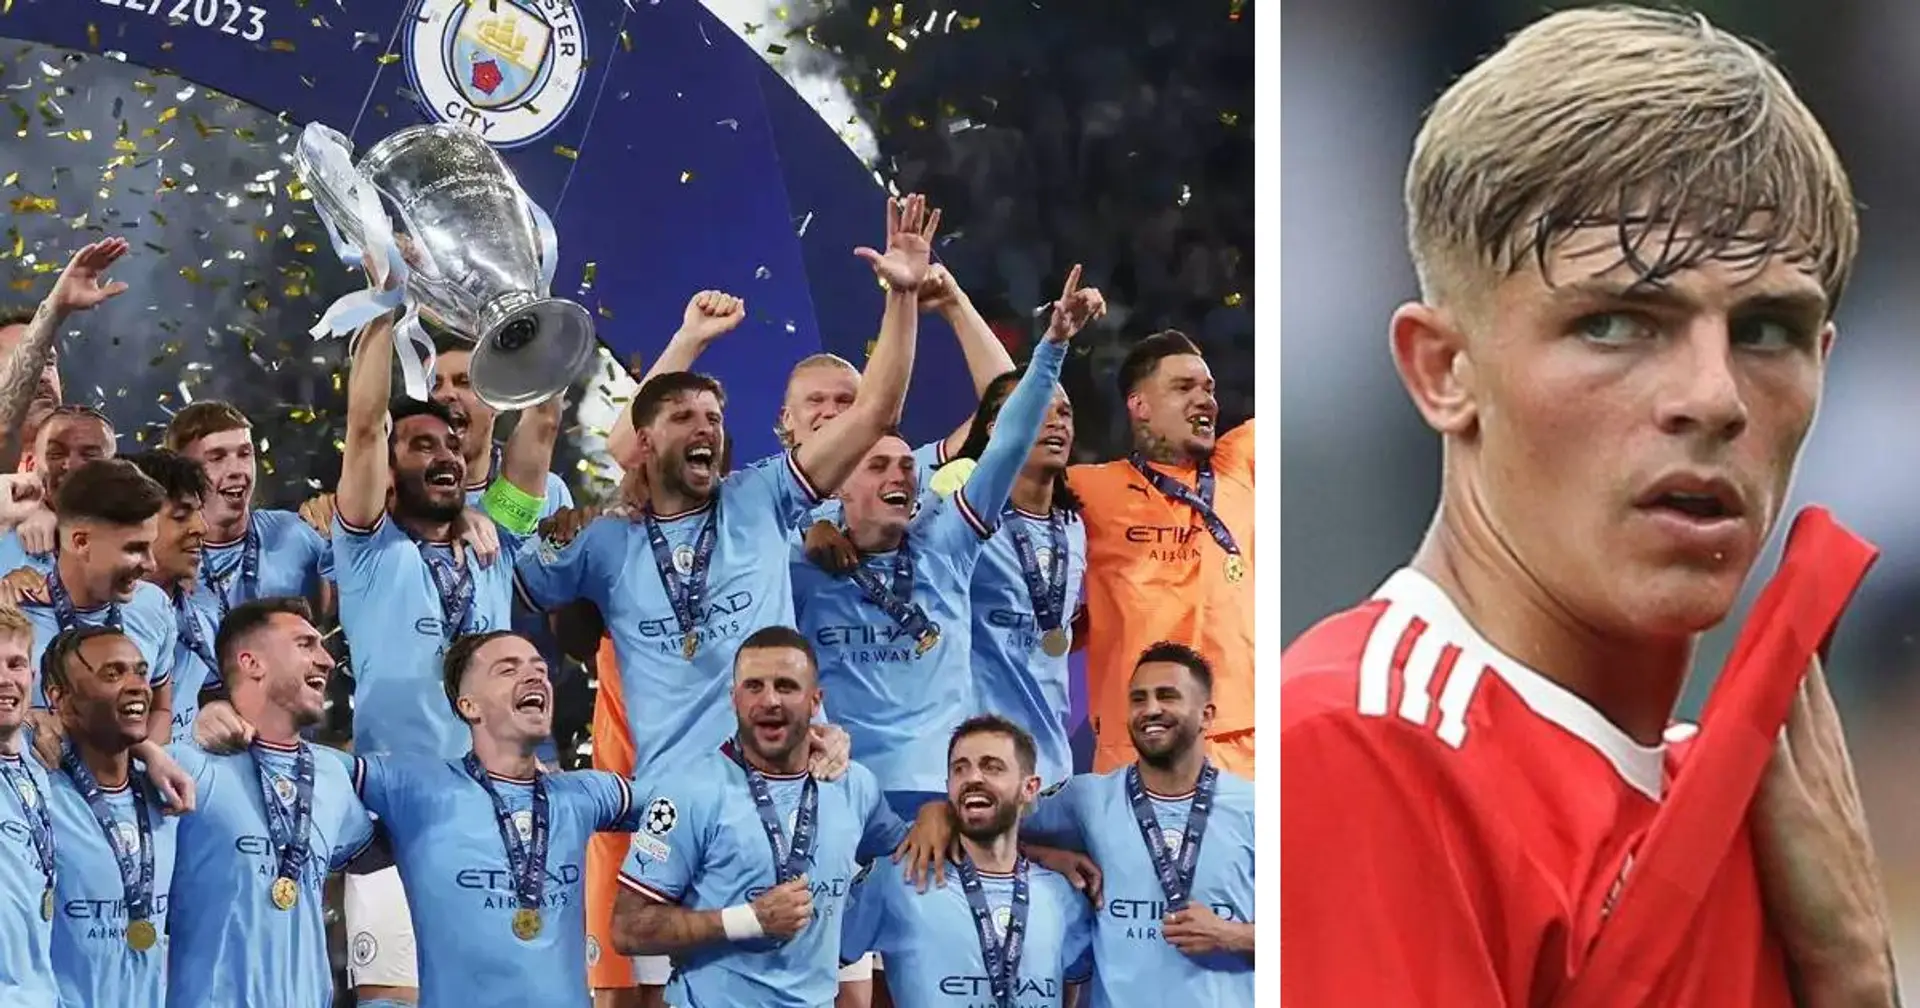 'Sloppy seconds': Brandon Williams aims brutal dig at Man City after their treble win